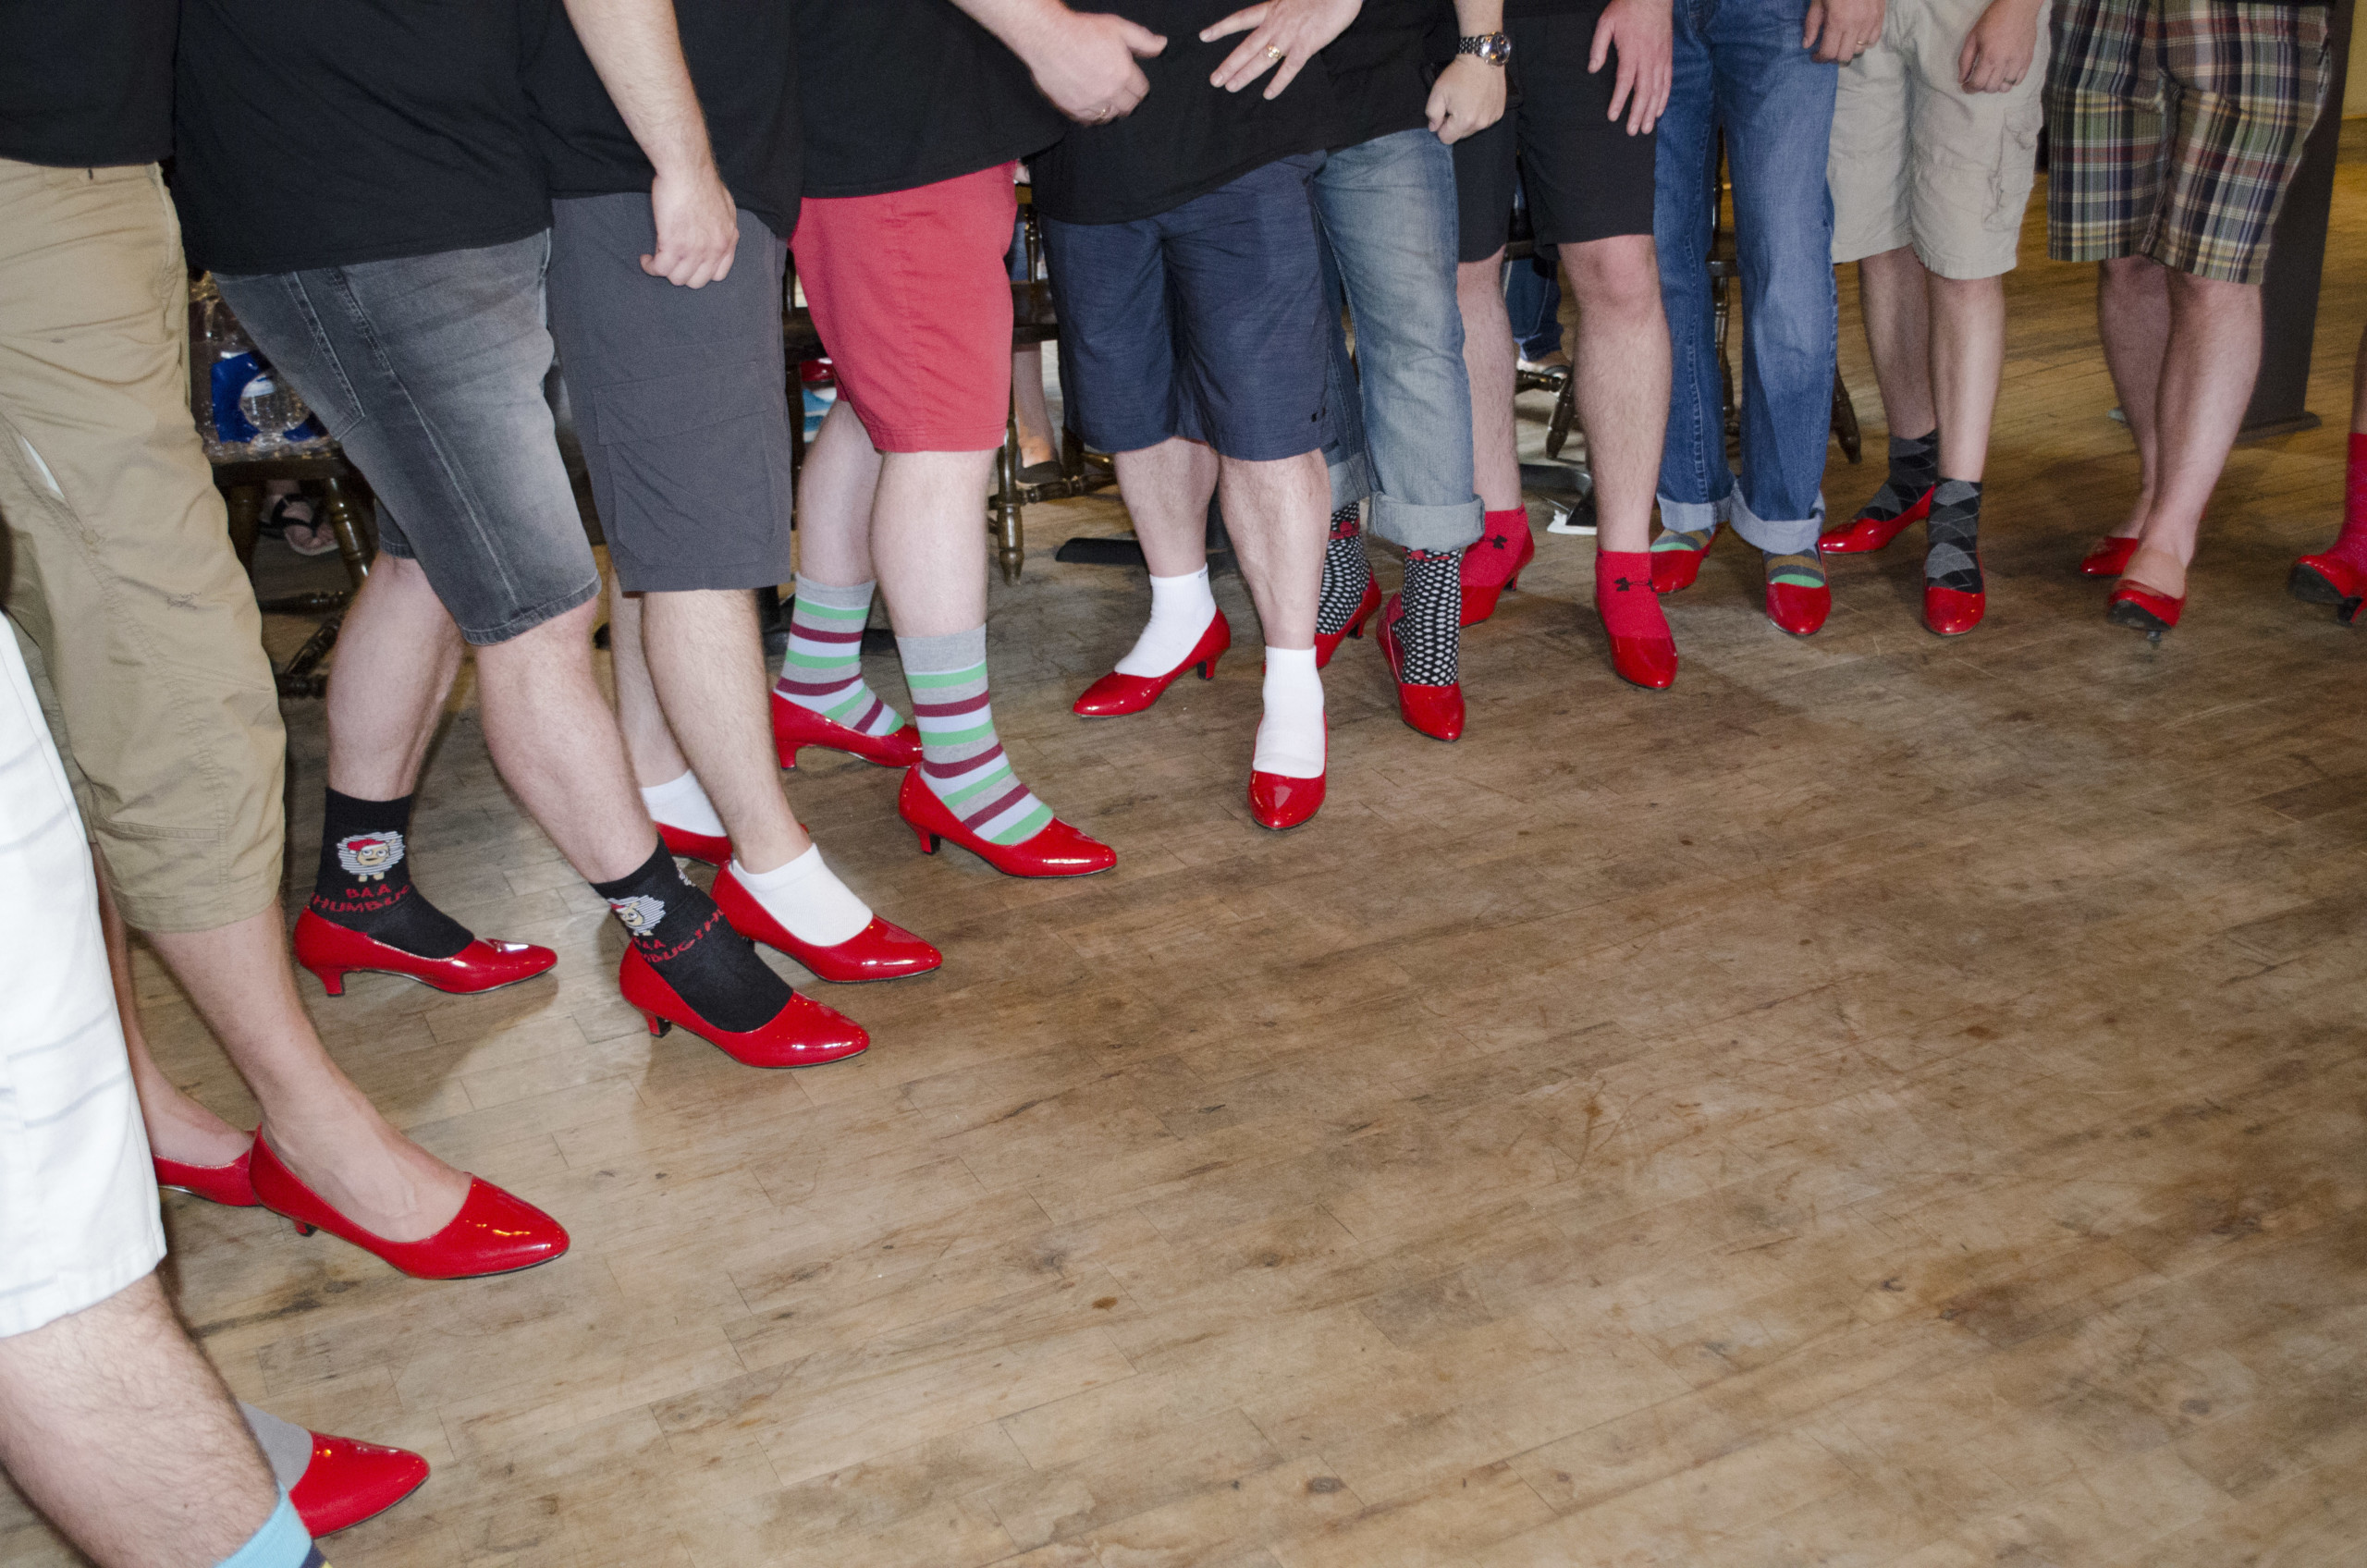 Walk a Mile in Her Shoes returns for another year